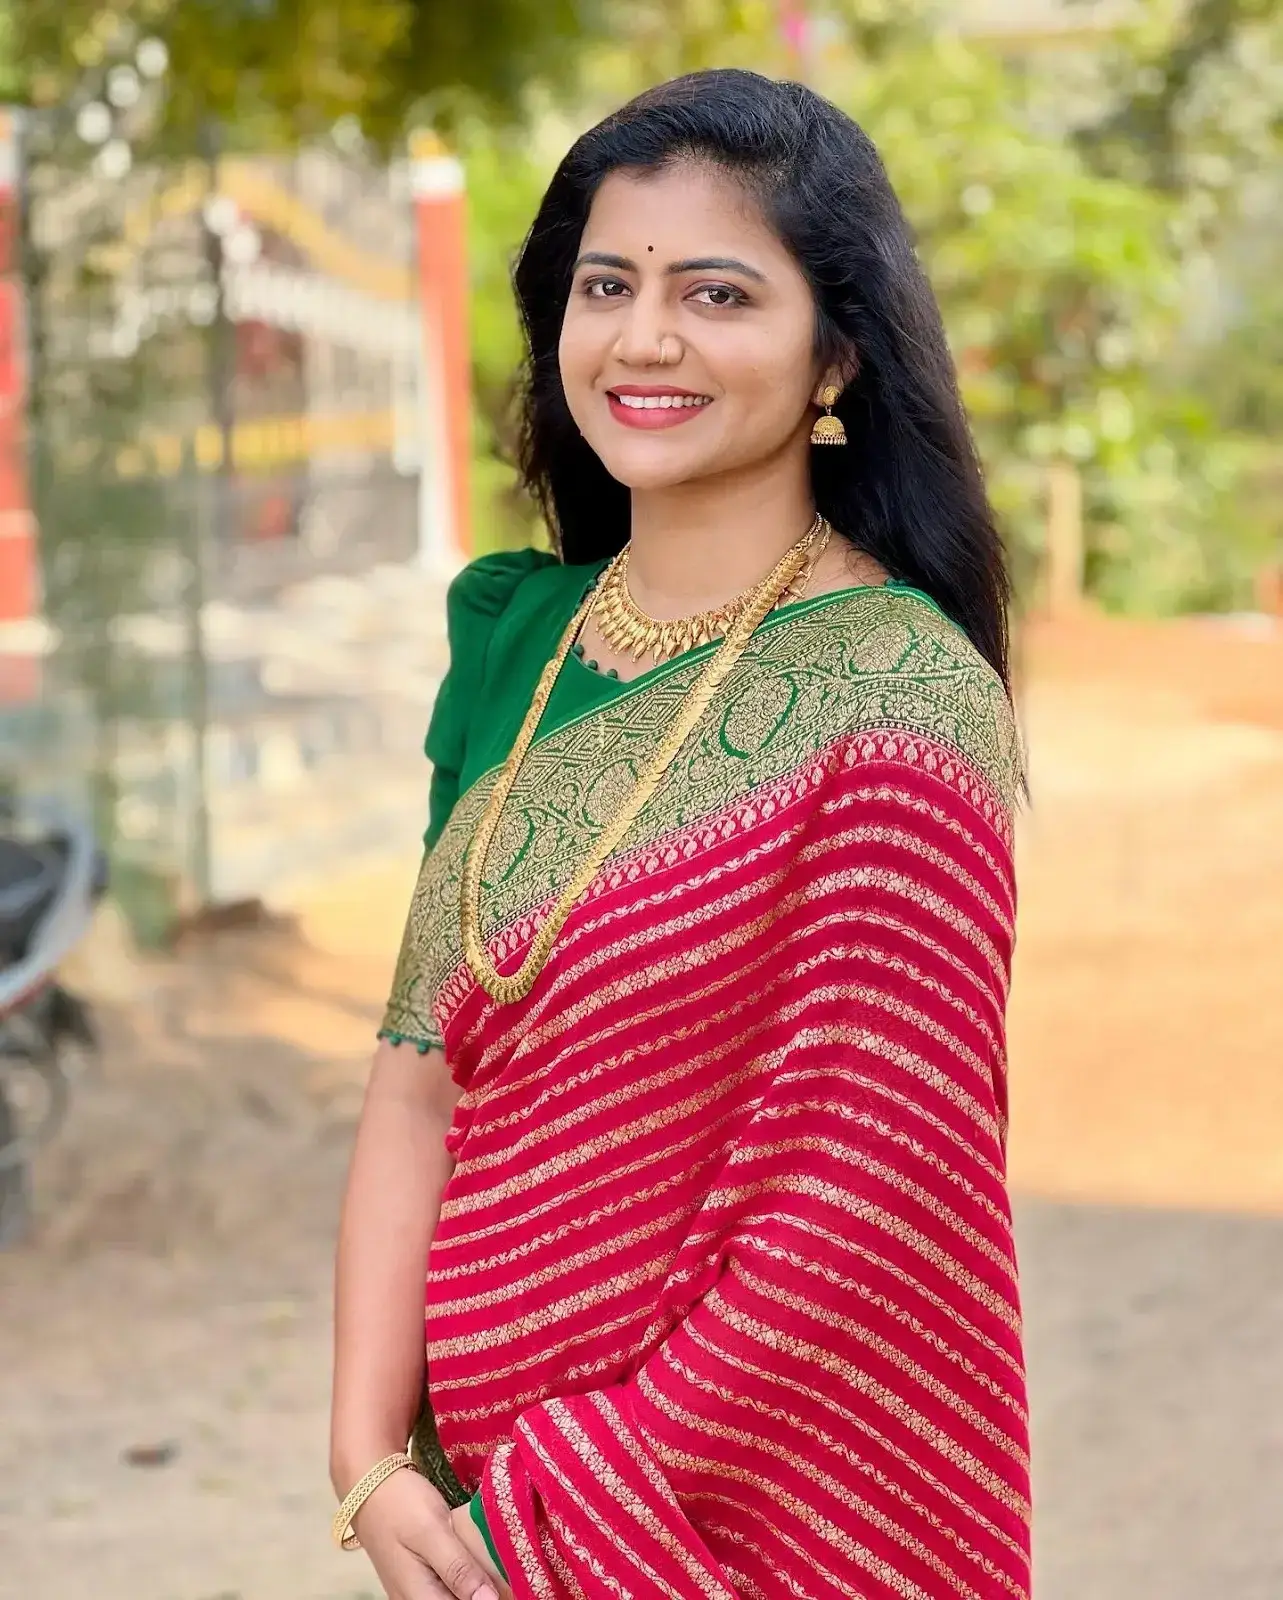 INDIAN TV ACTRESS SHIVA JYOTHI IMAGES IN TRADITIONAL RED SAREE